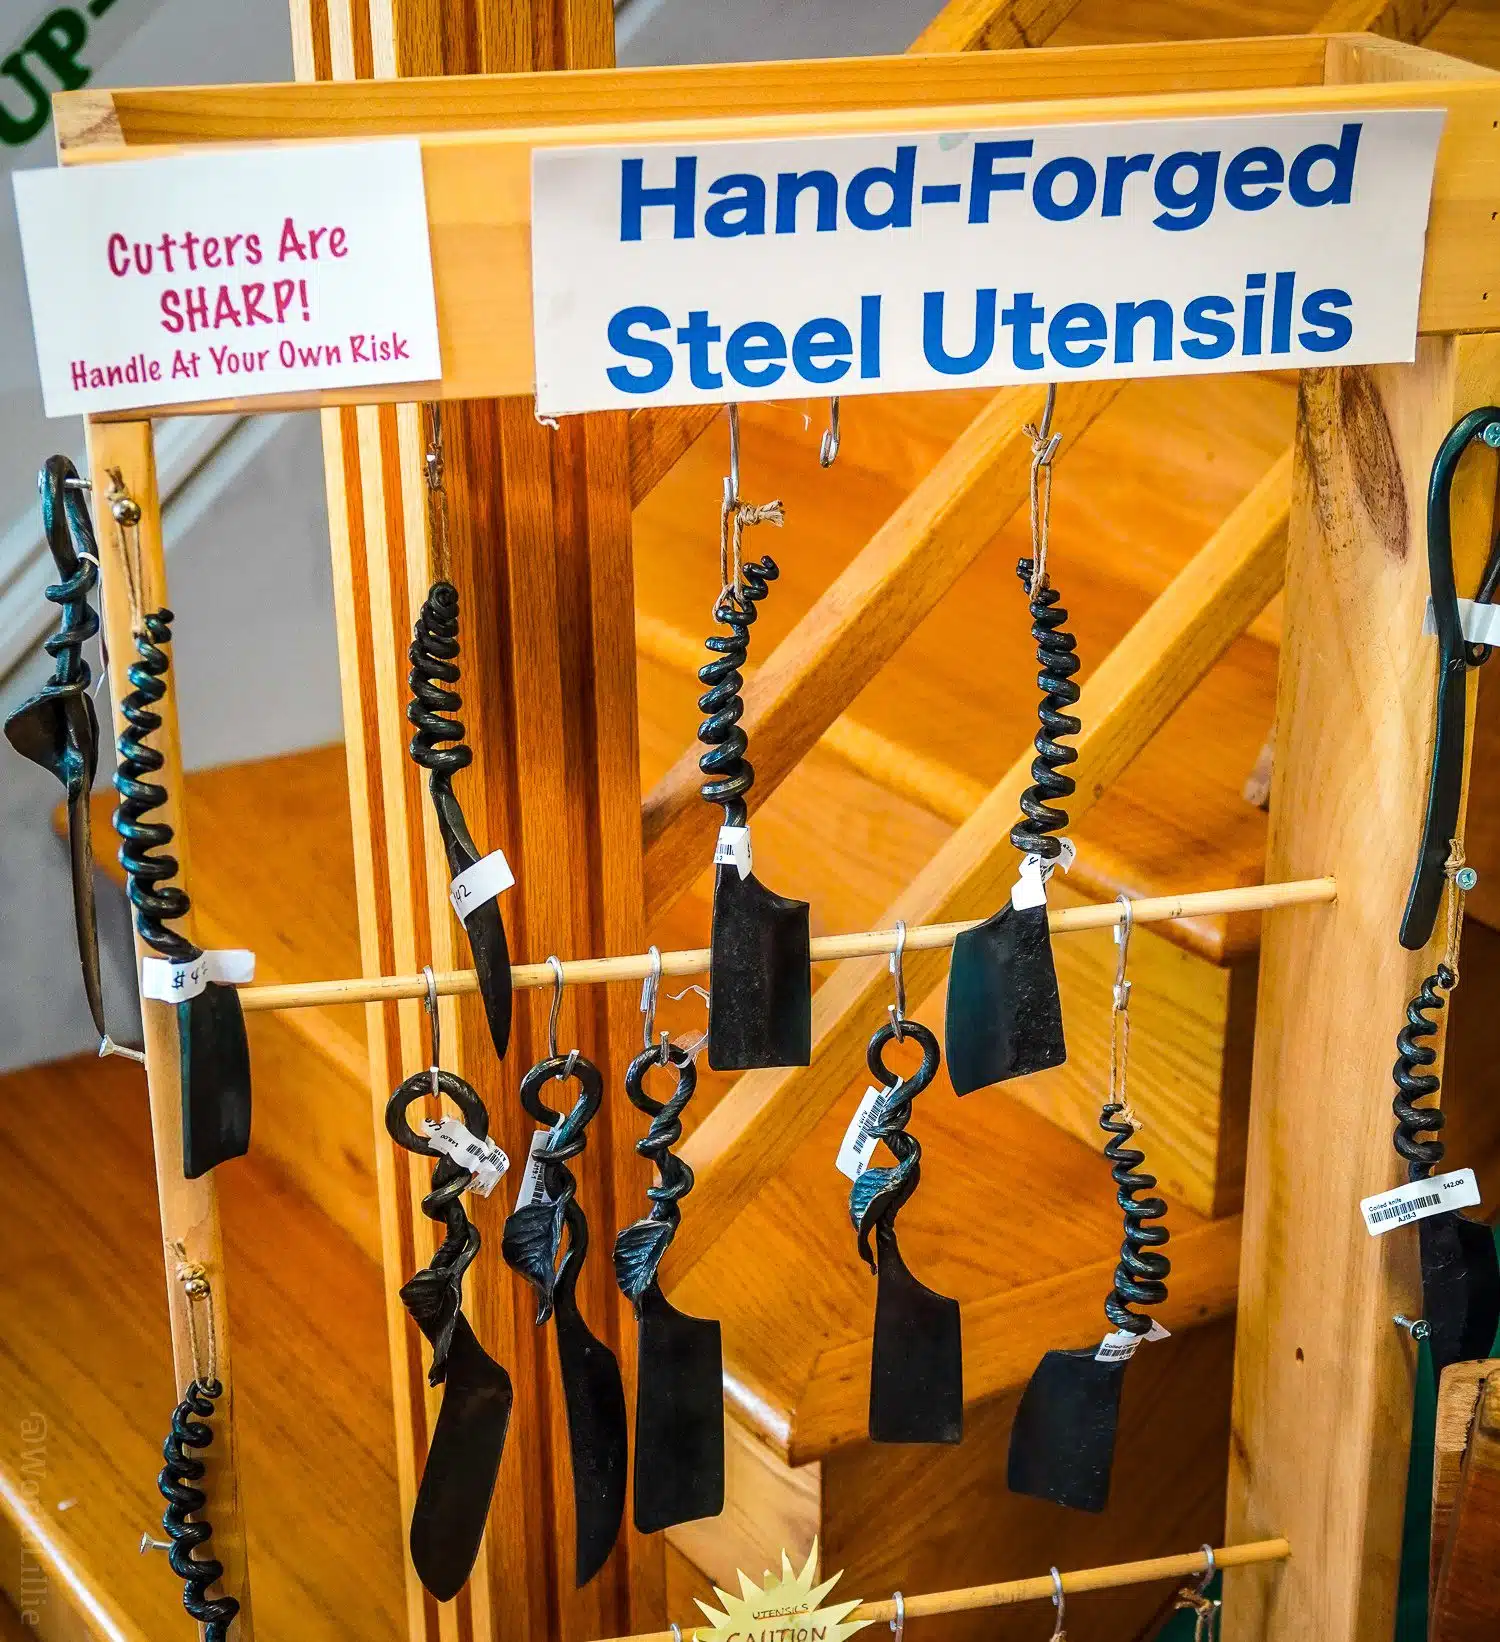 These hand-forged steel utensils are AWESOME.